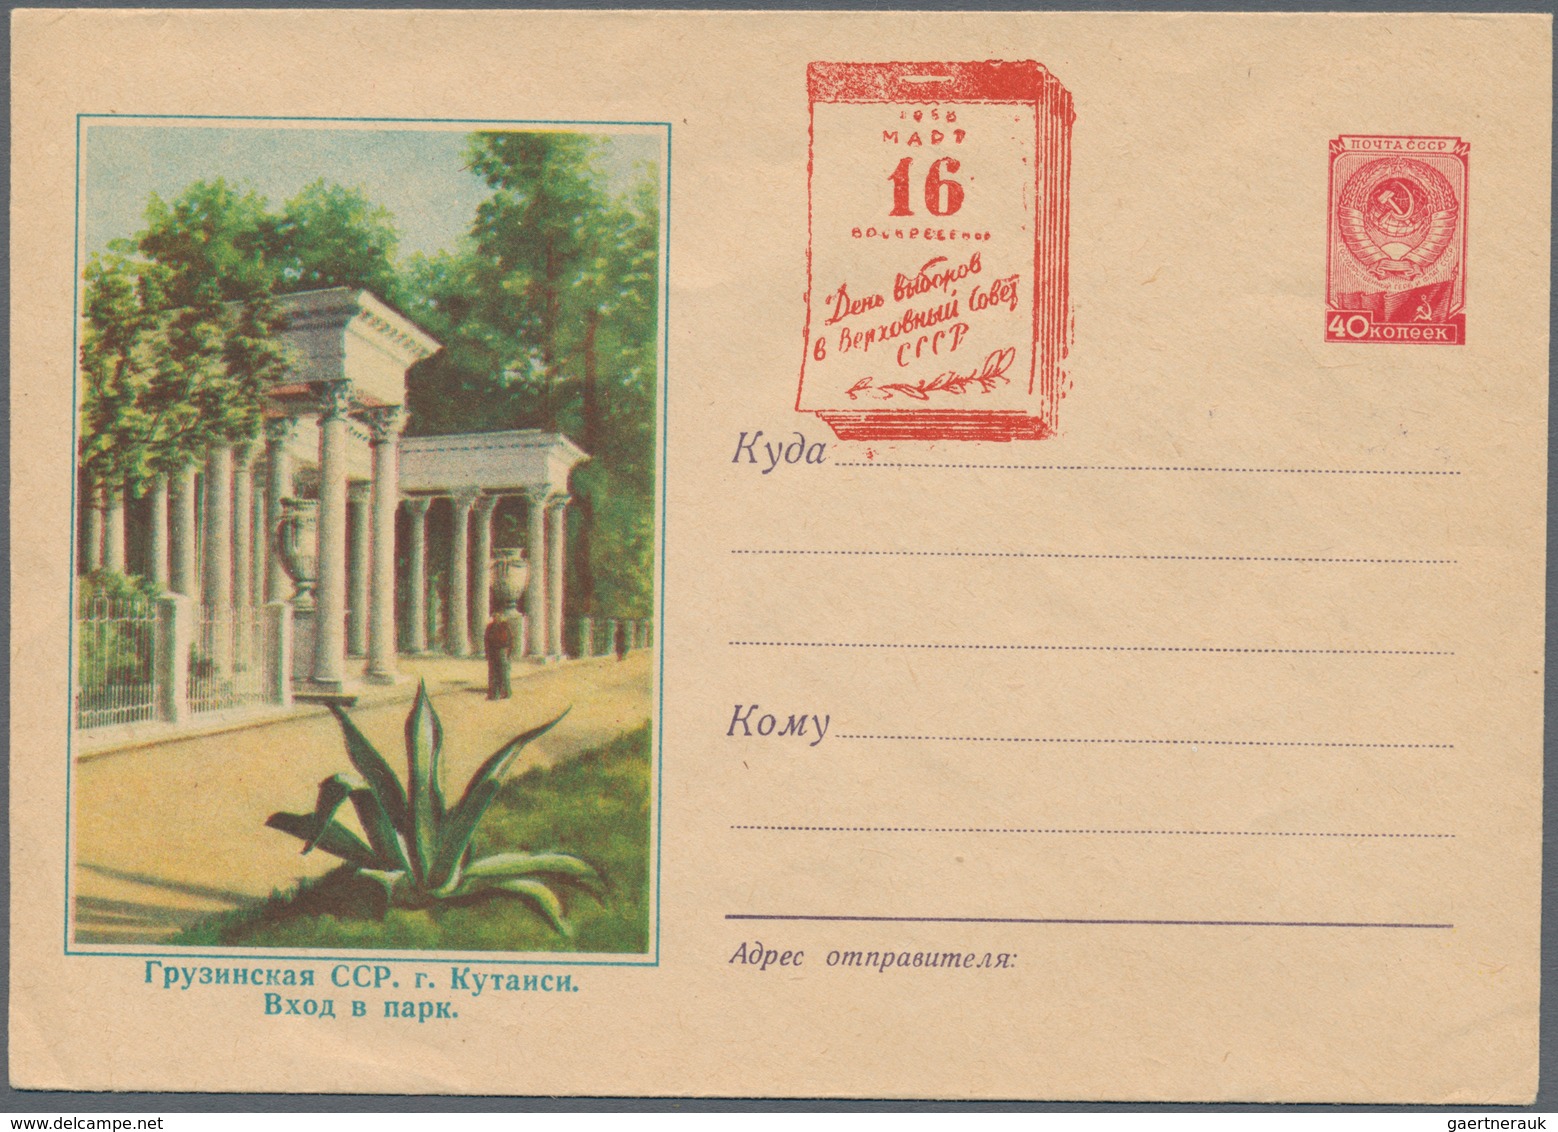 Sowjetunion: 1880/2015 (ca.) accumulation of ca. 589 stationeries, pictured postal stationery cards